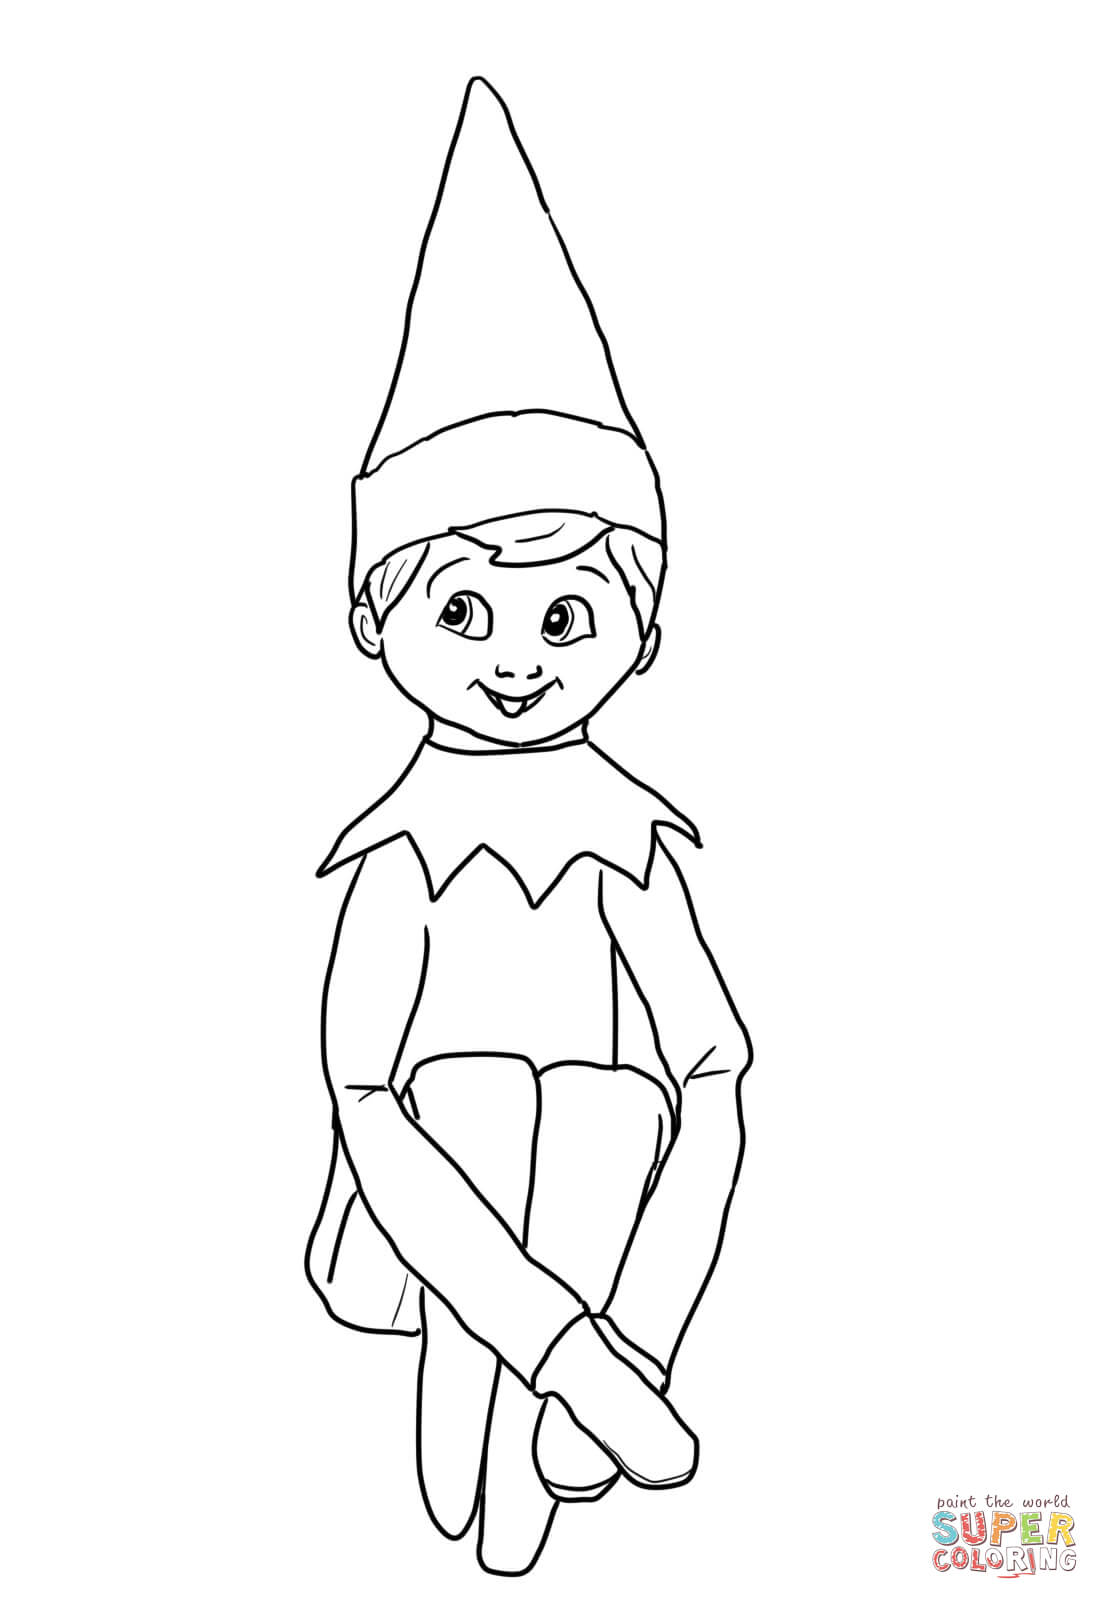 11 Pics of Elf On Shelf Printable Coloring Pages - Elf On the ...